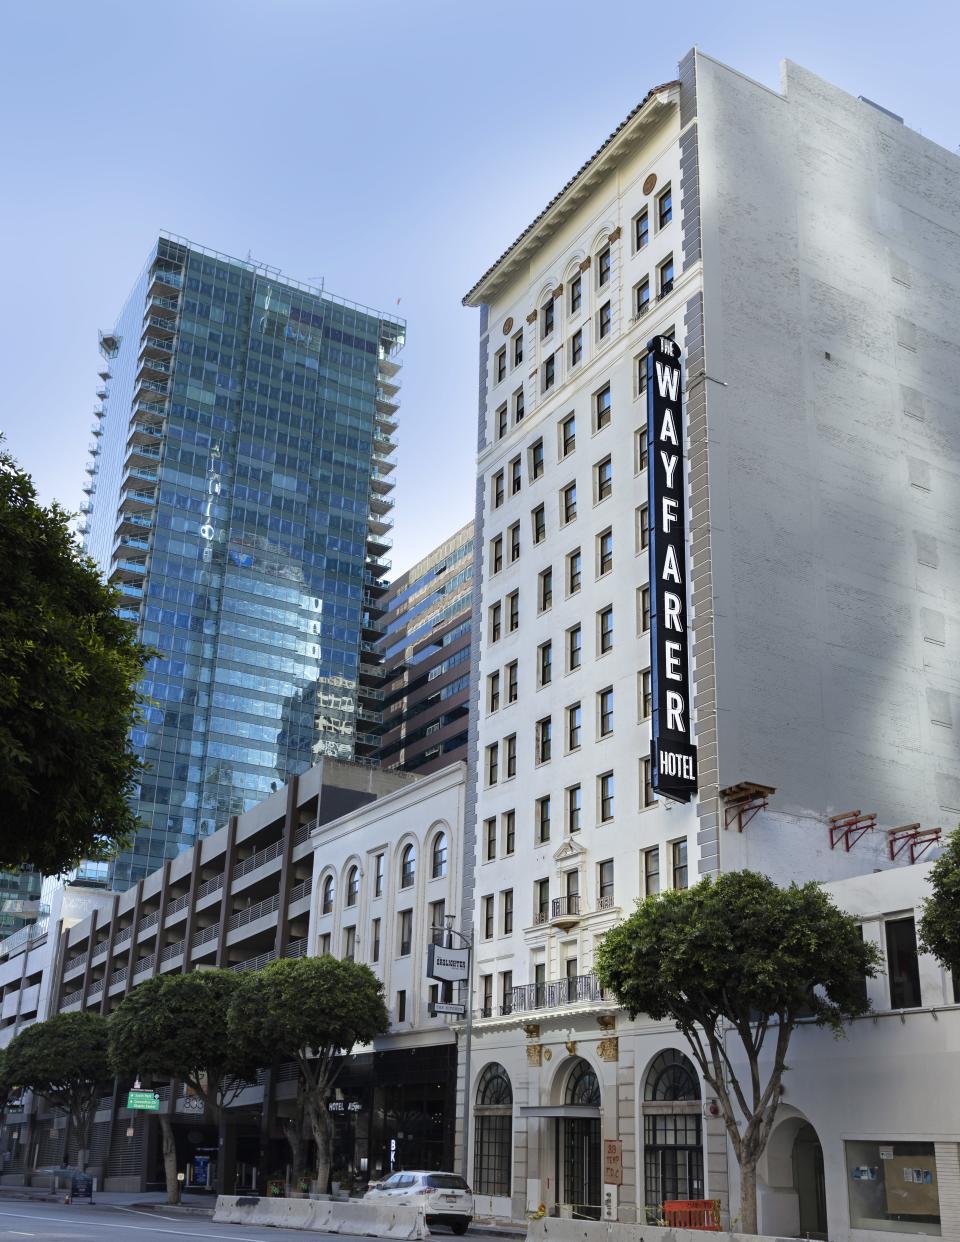 The Wayfarer, a new hotel in Downtown Los Angeles.